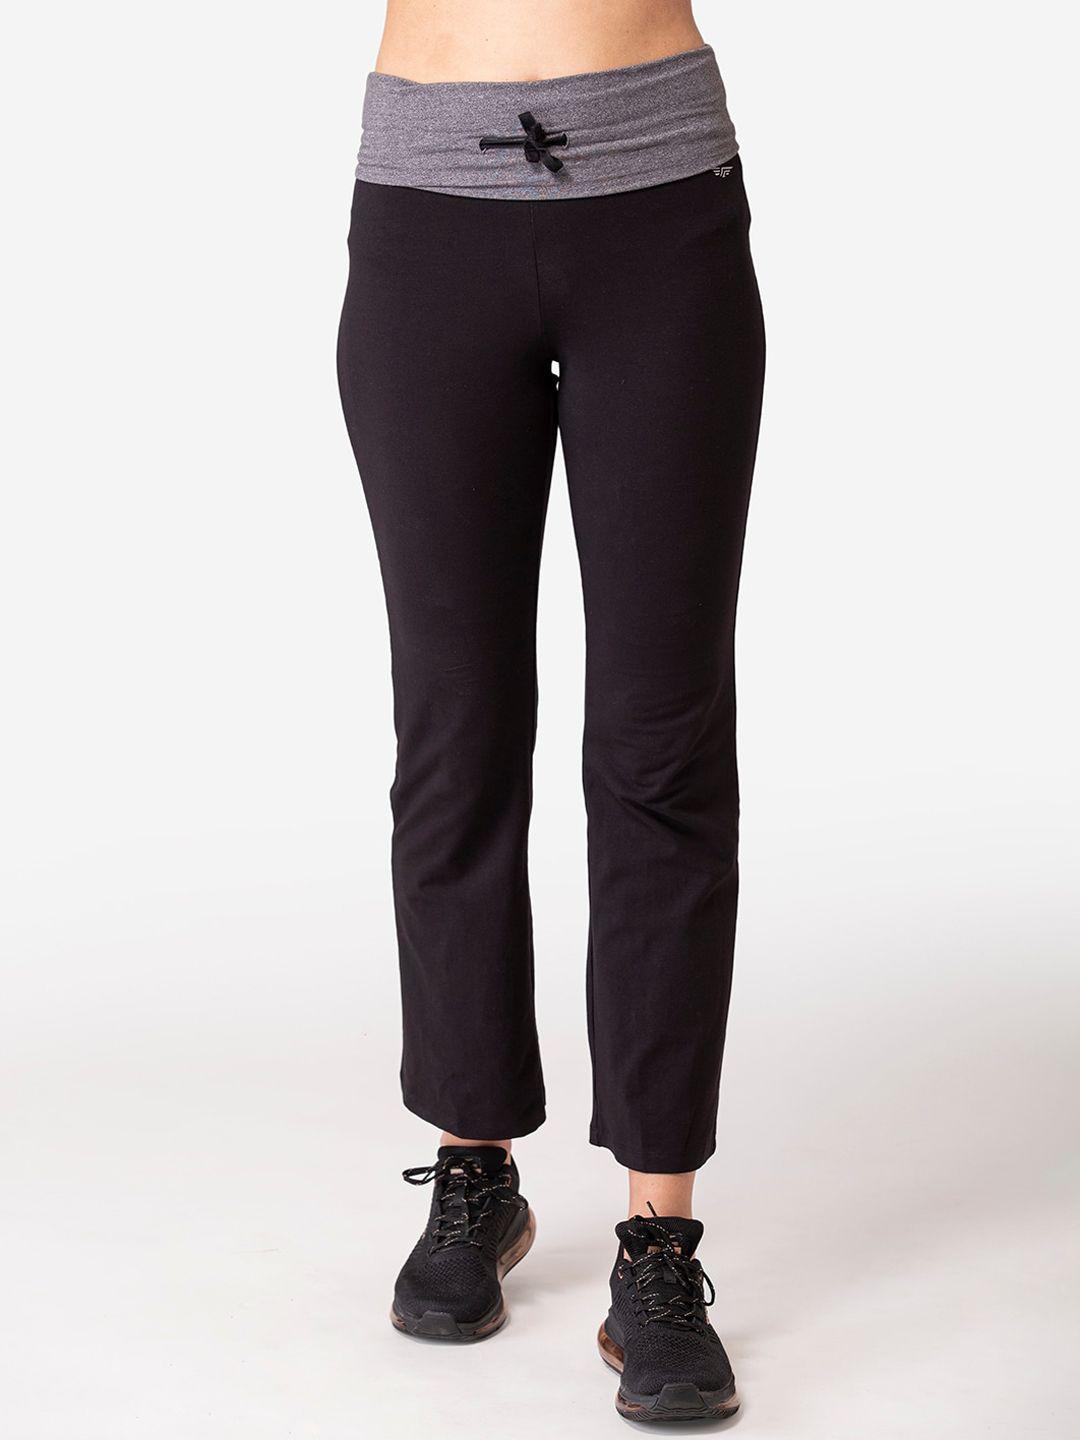 red-tape-women-black-&-grey-solid-track-pants